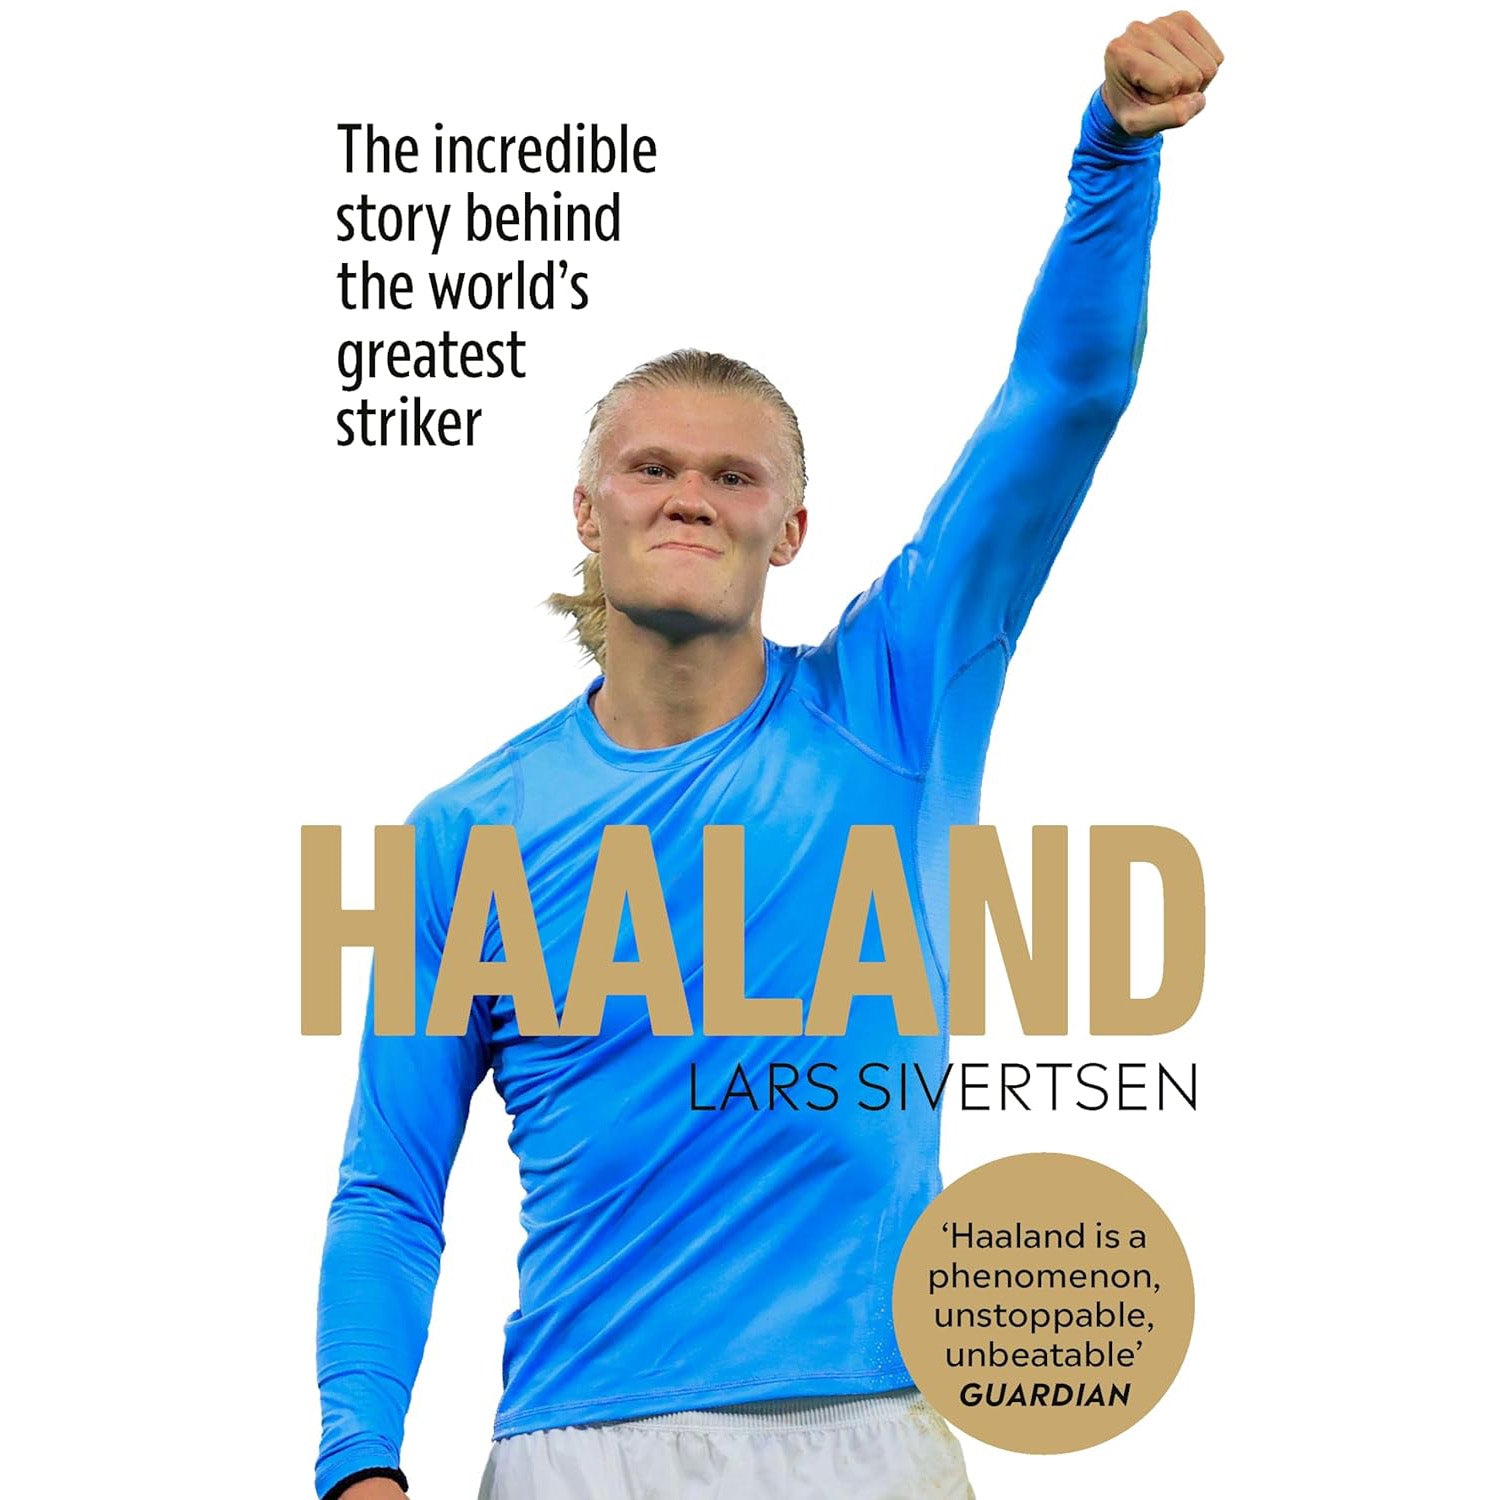 Haaland – The incredible story behind the world's greatest striker